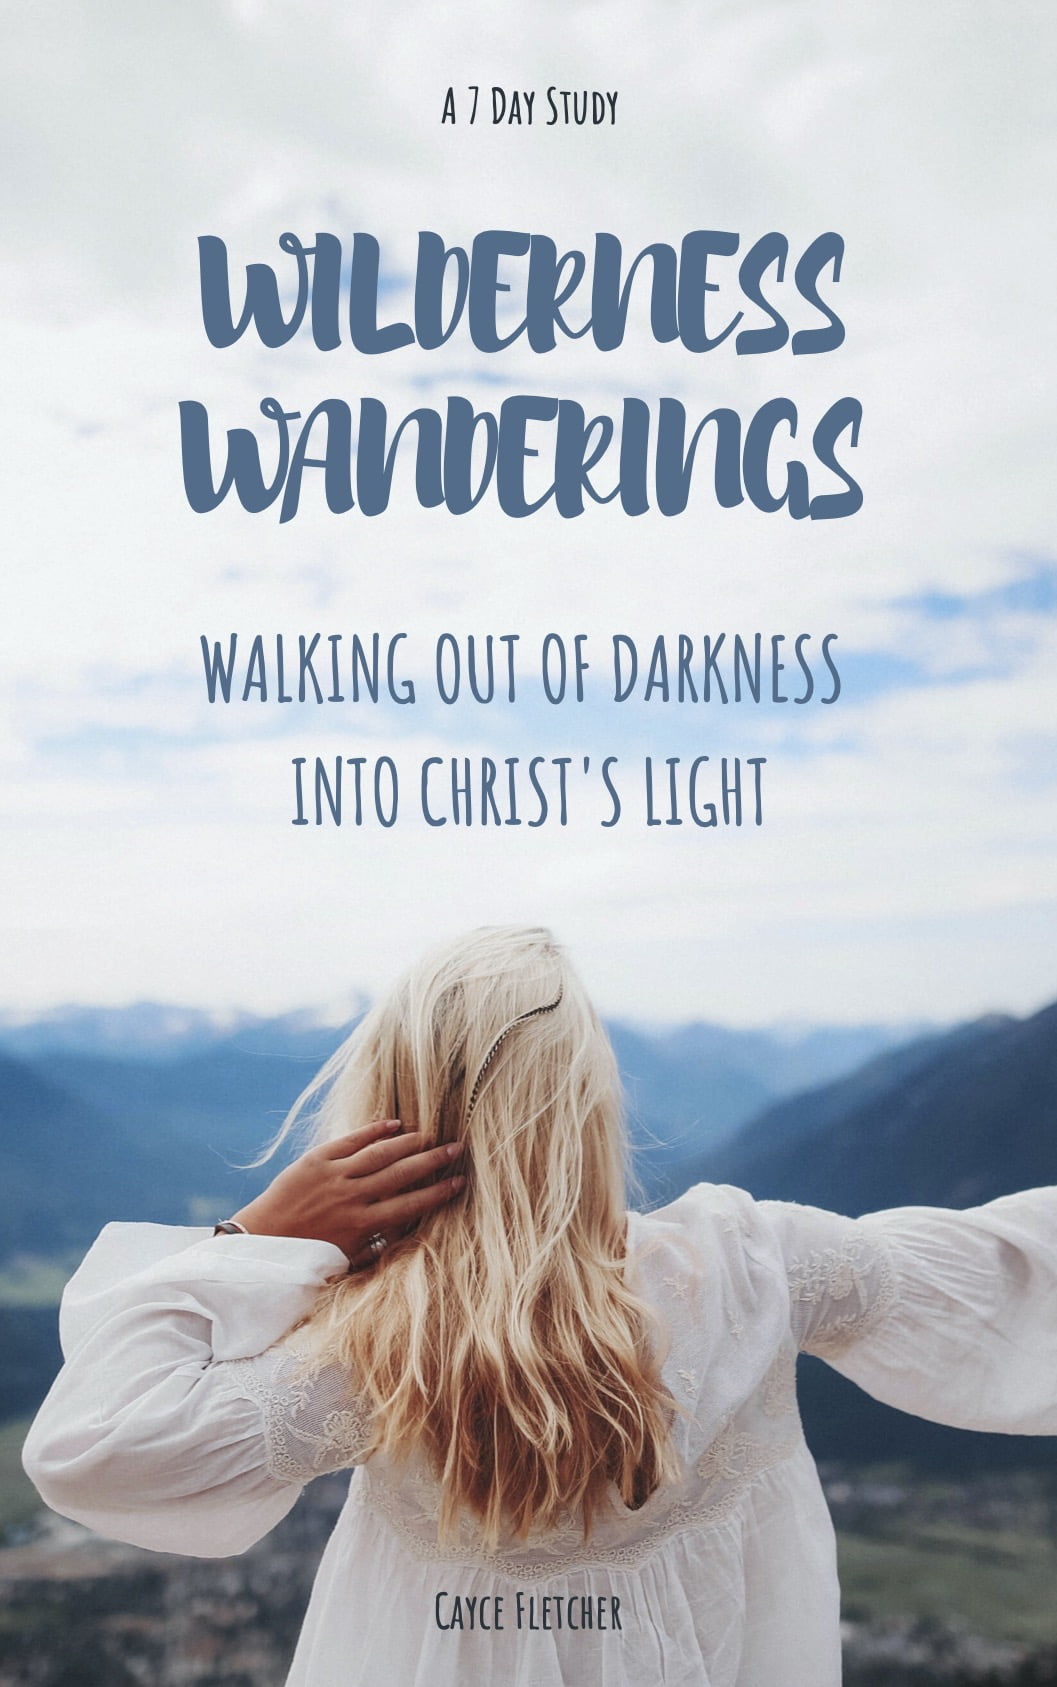 The Wilderness Wanderings: Walking Out of Darkness into Christ’s Light